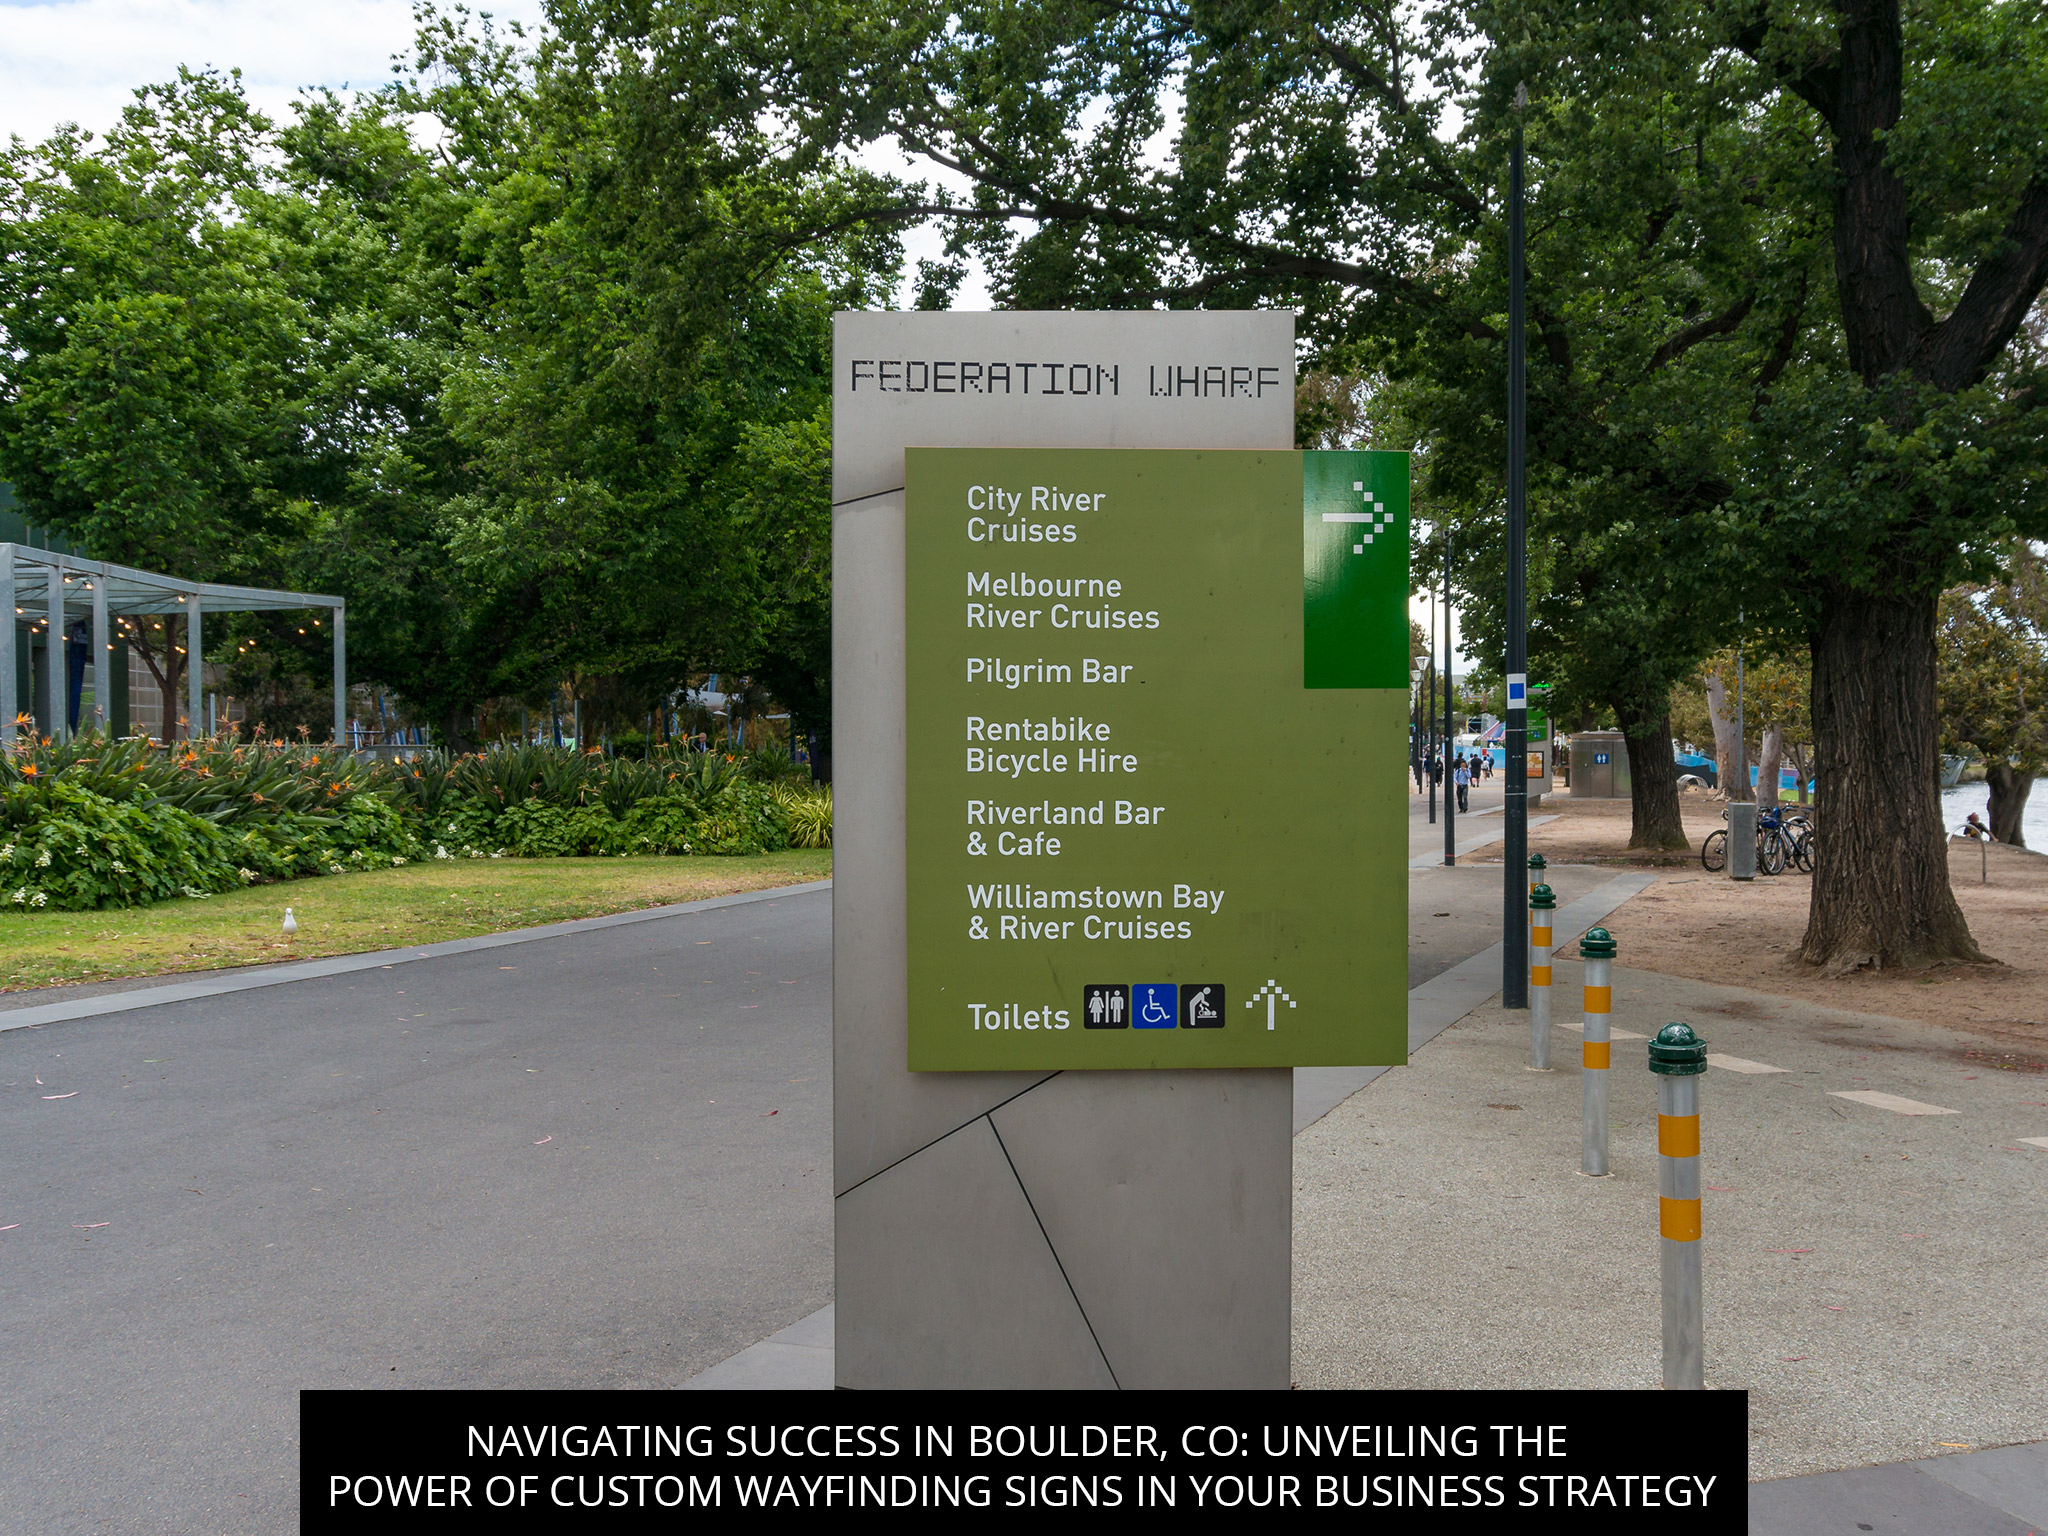 Navigating Success in Boulder, CO: Unveiling the Power of Custom Wayfinding Signs in Your Business Strategy